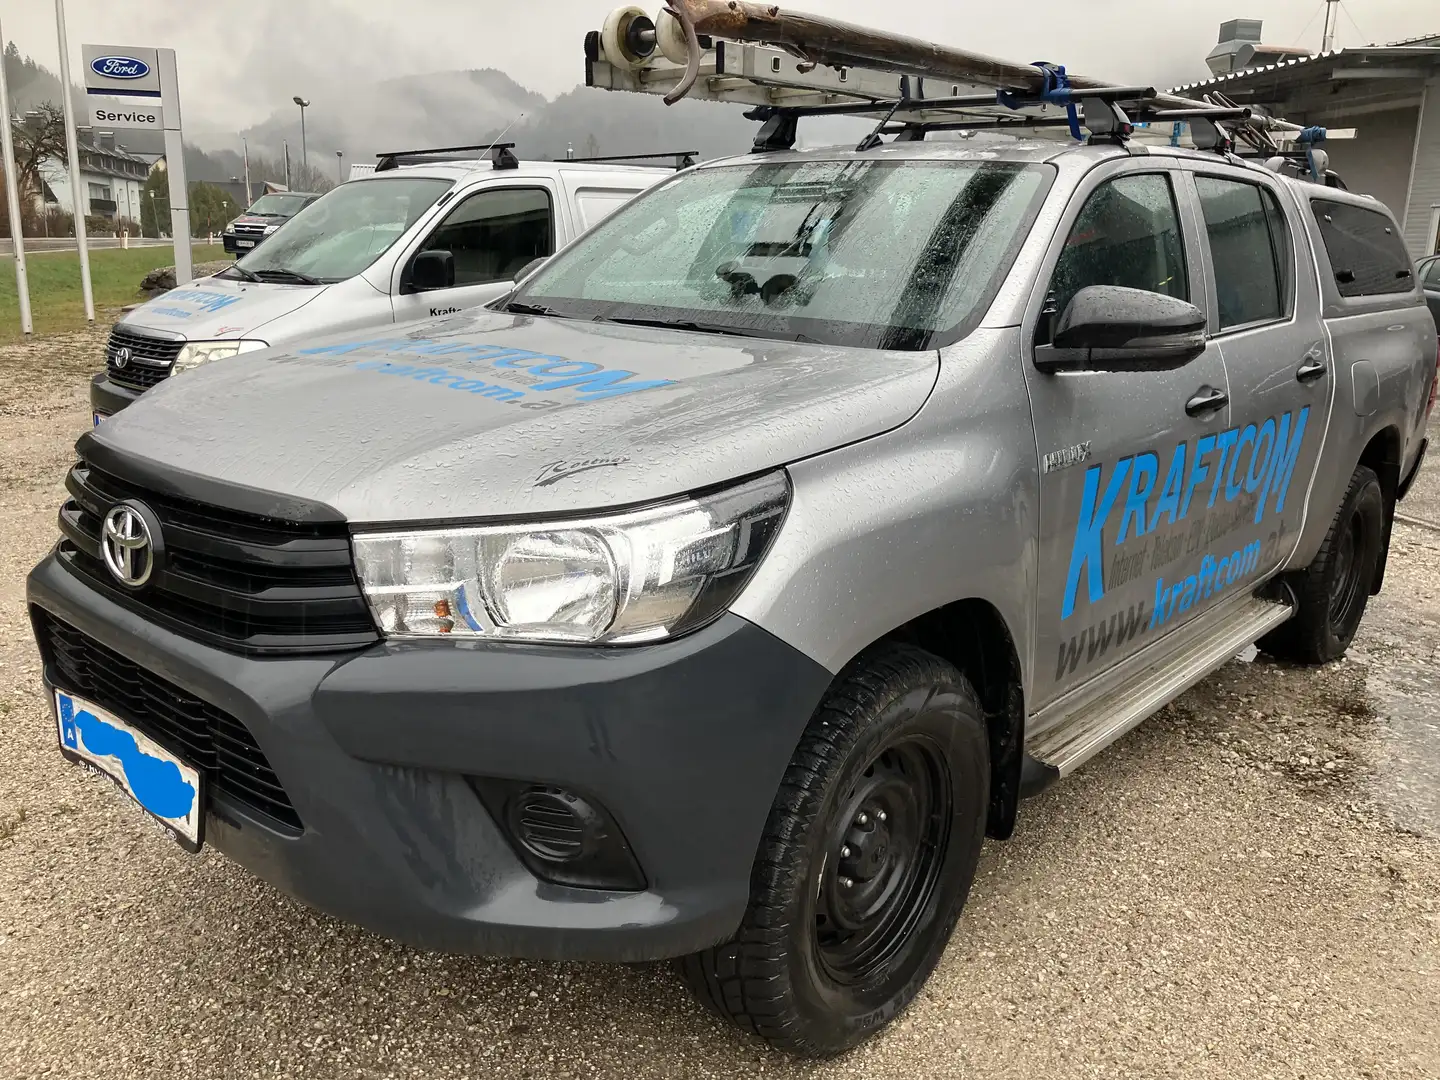 Toyota Hilux Hilux DK Country 4WD 2,4 D-4D Country srebrna - 1